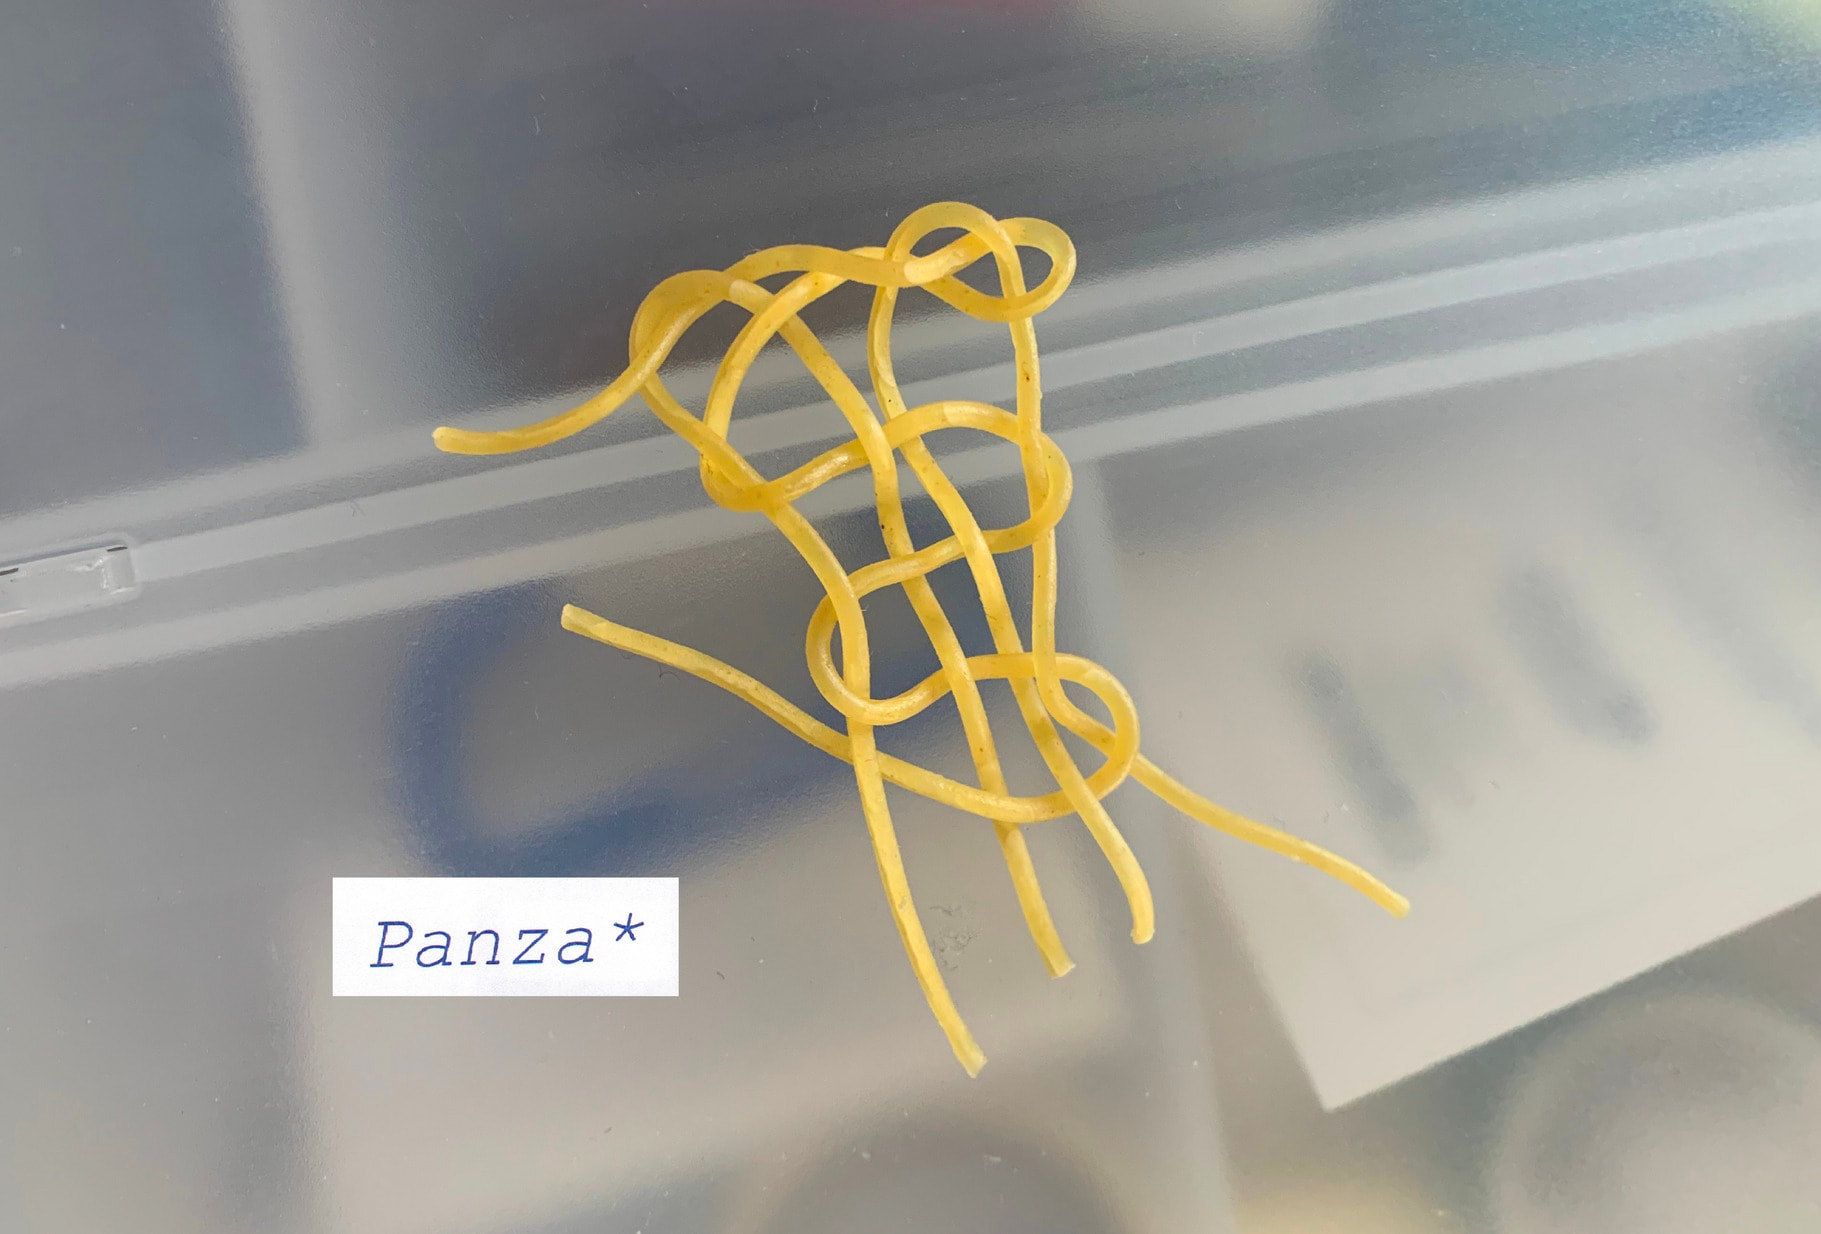 Image of spaghetti-like yellow plastic or rubber string knotted into an intricate shape, over an indistinct background. A small box of text reads ‘Panza’.